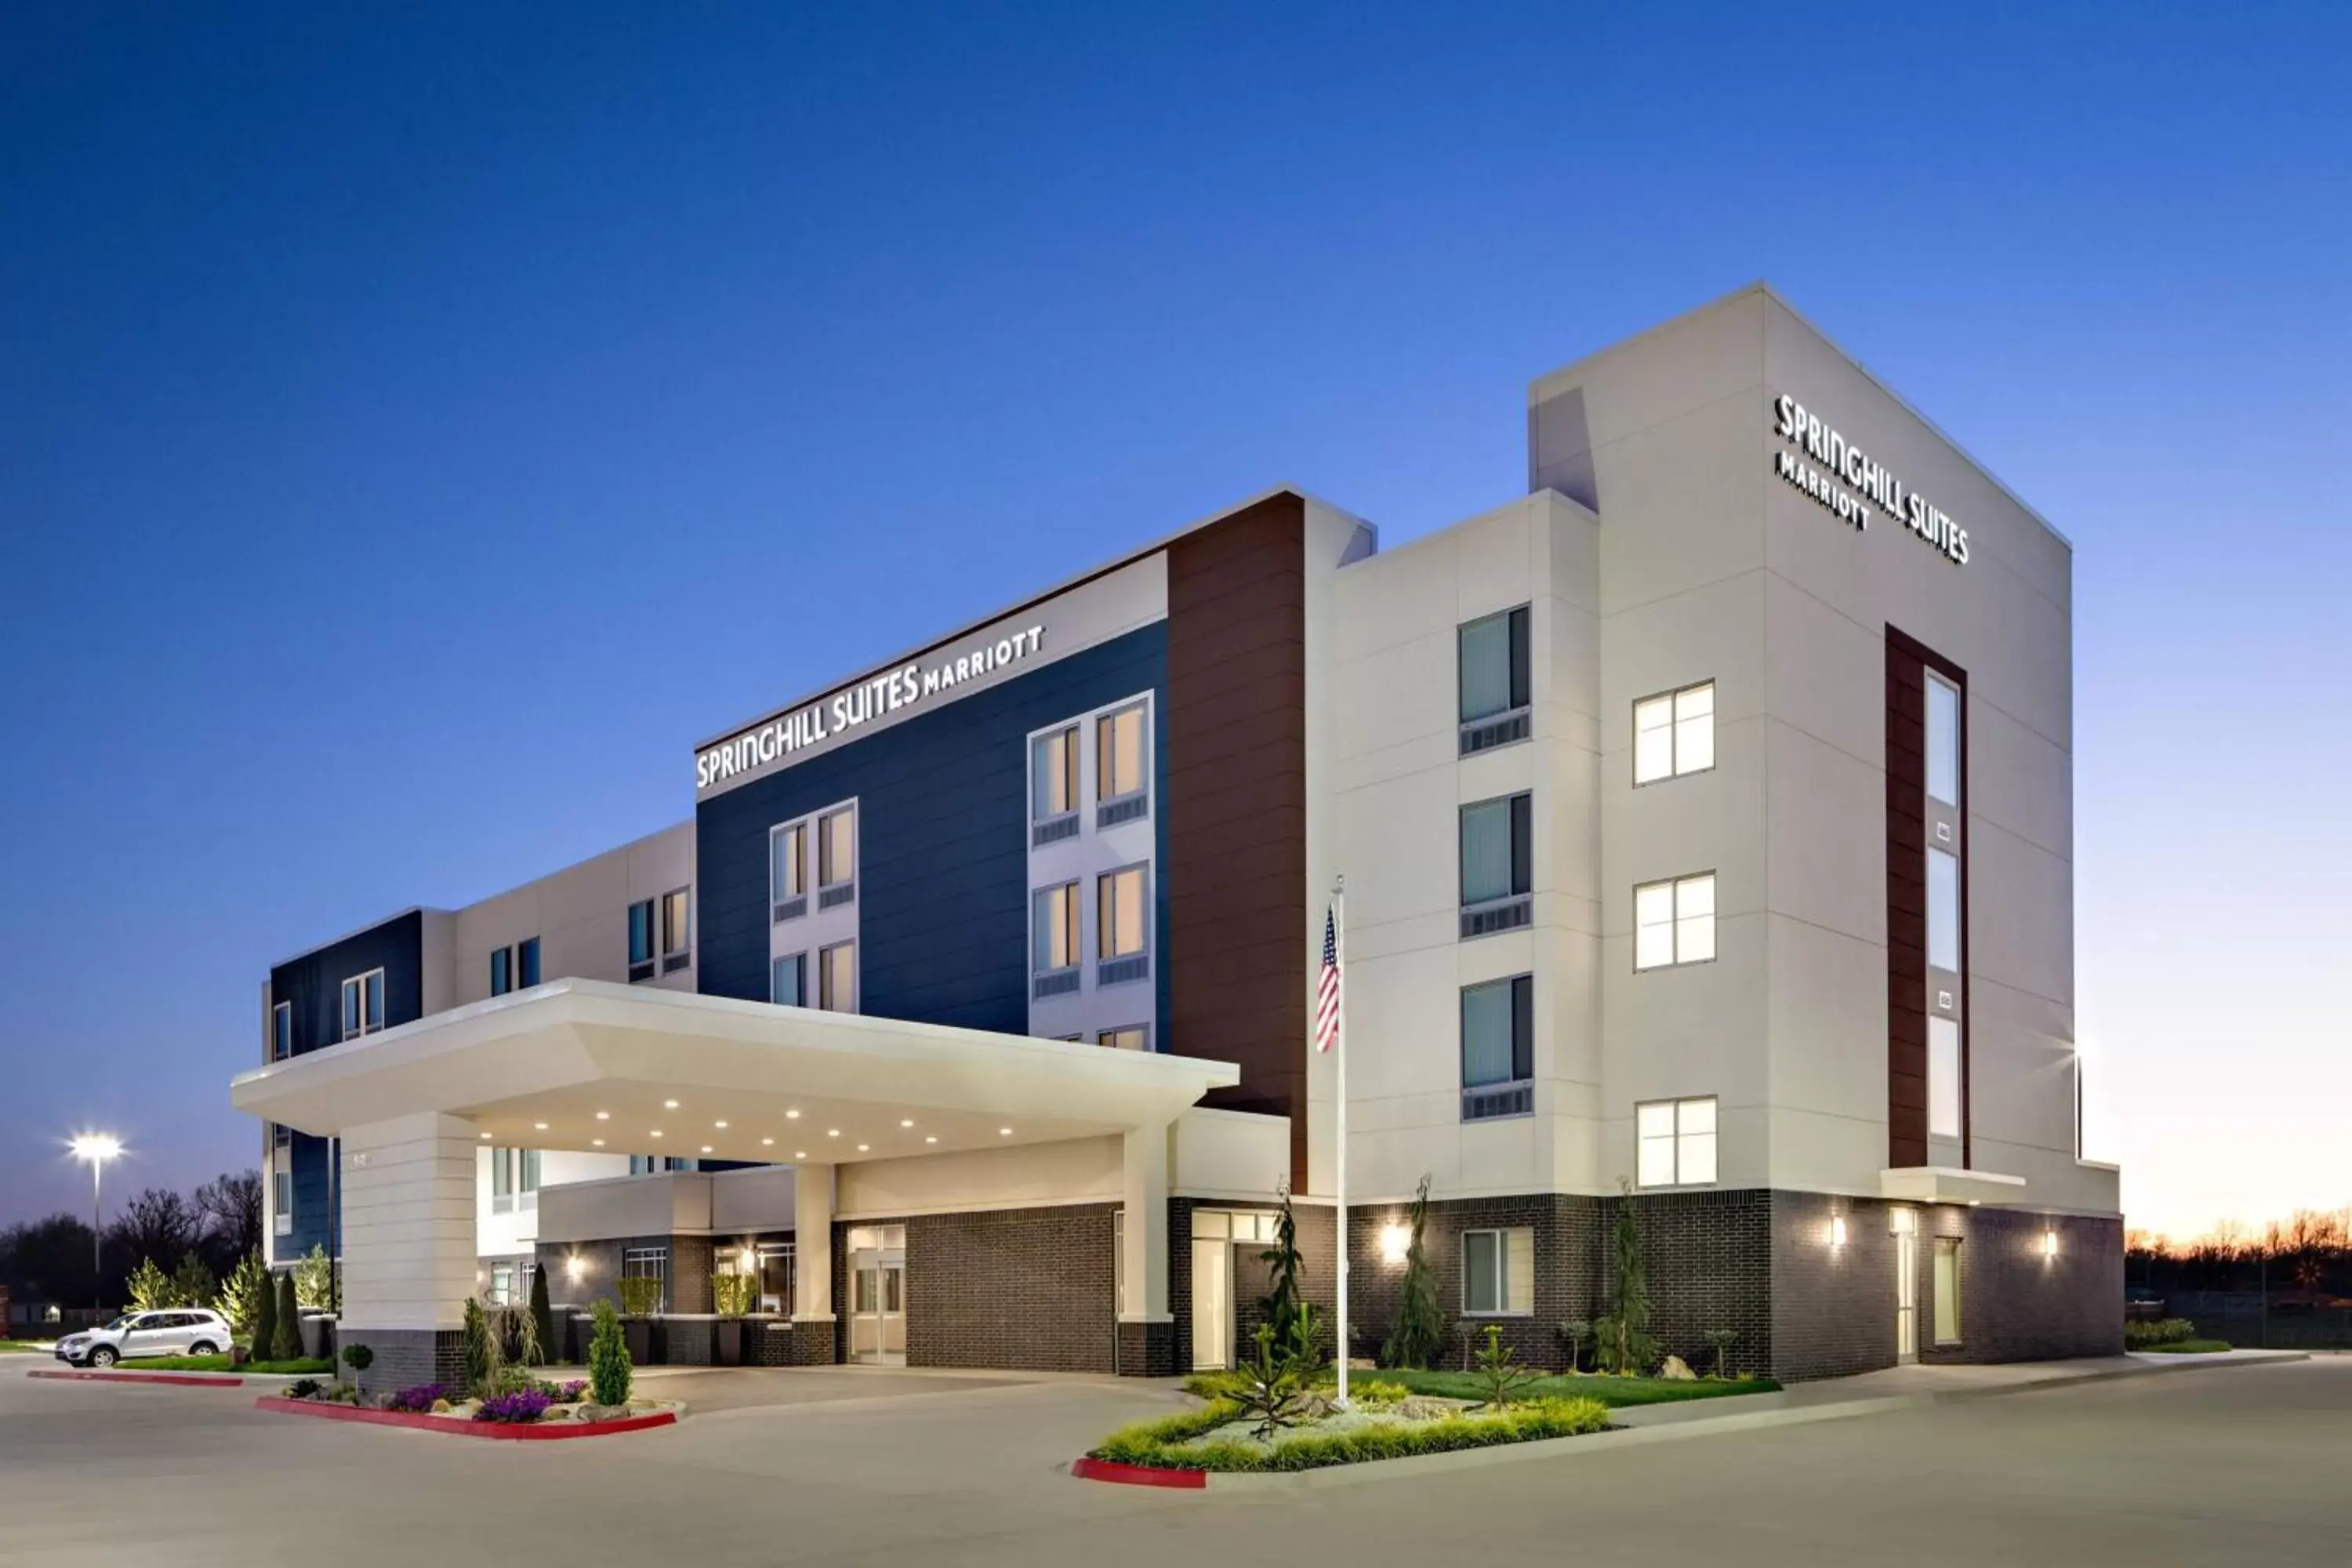 Property Building in SpringHill Suites by Marriott Oklahoma City Midwest City Del City